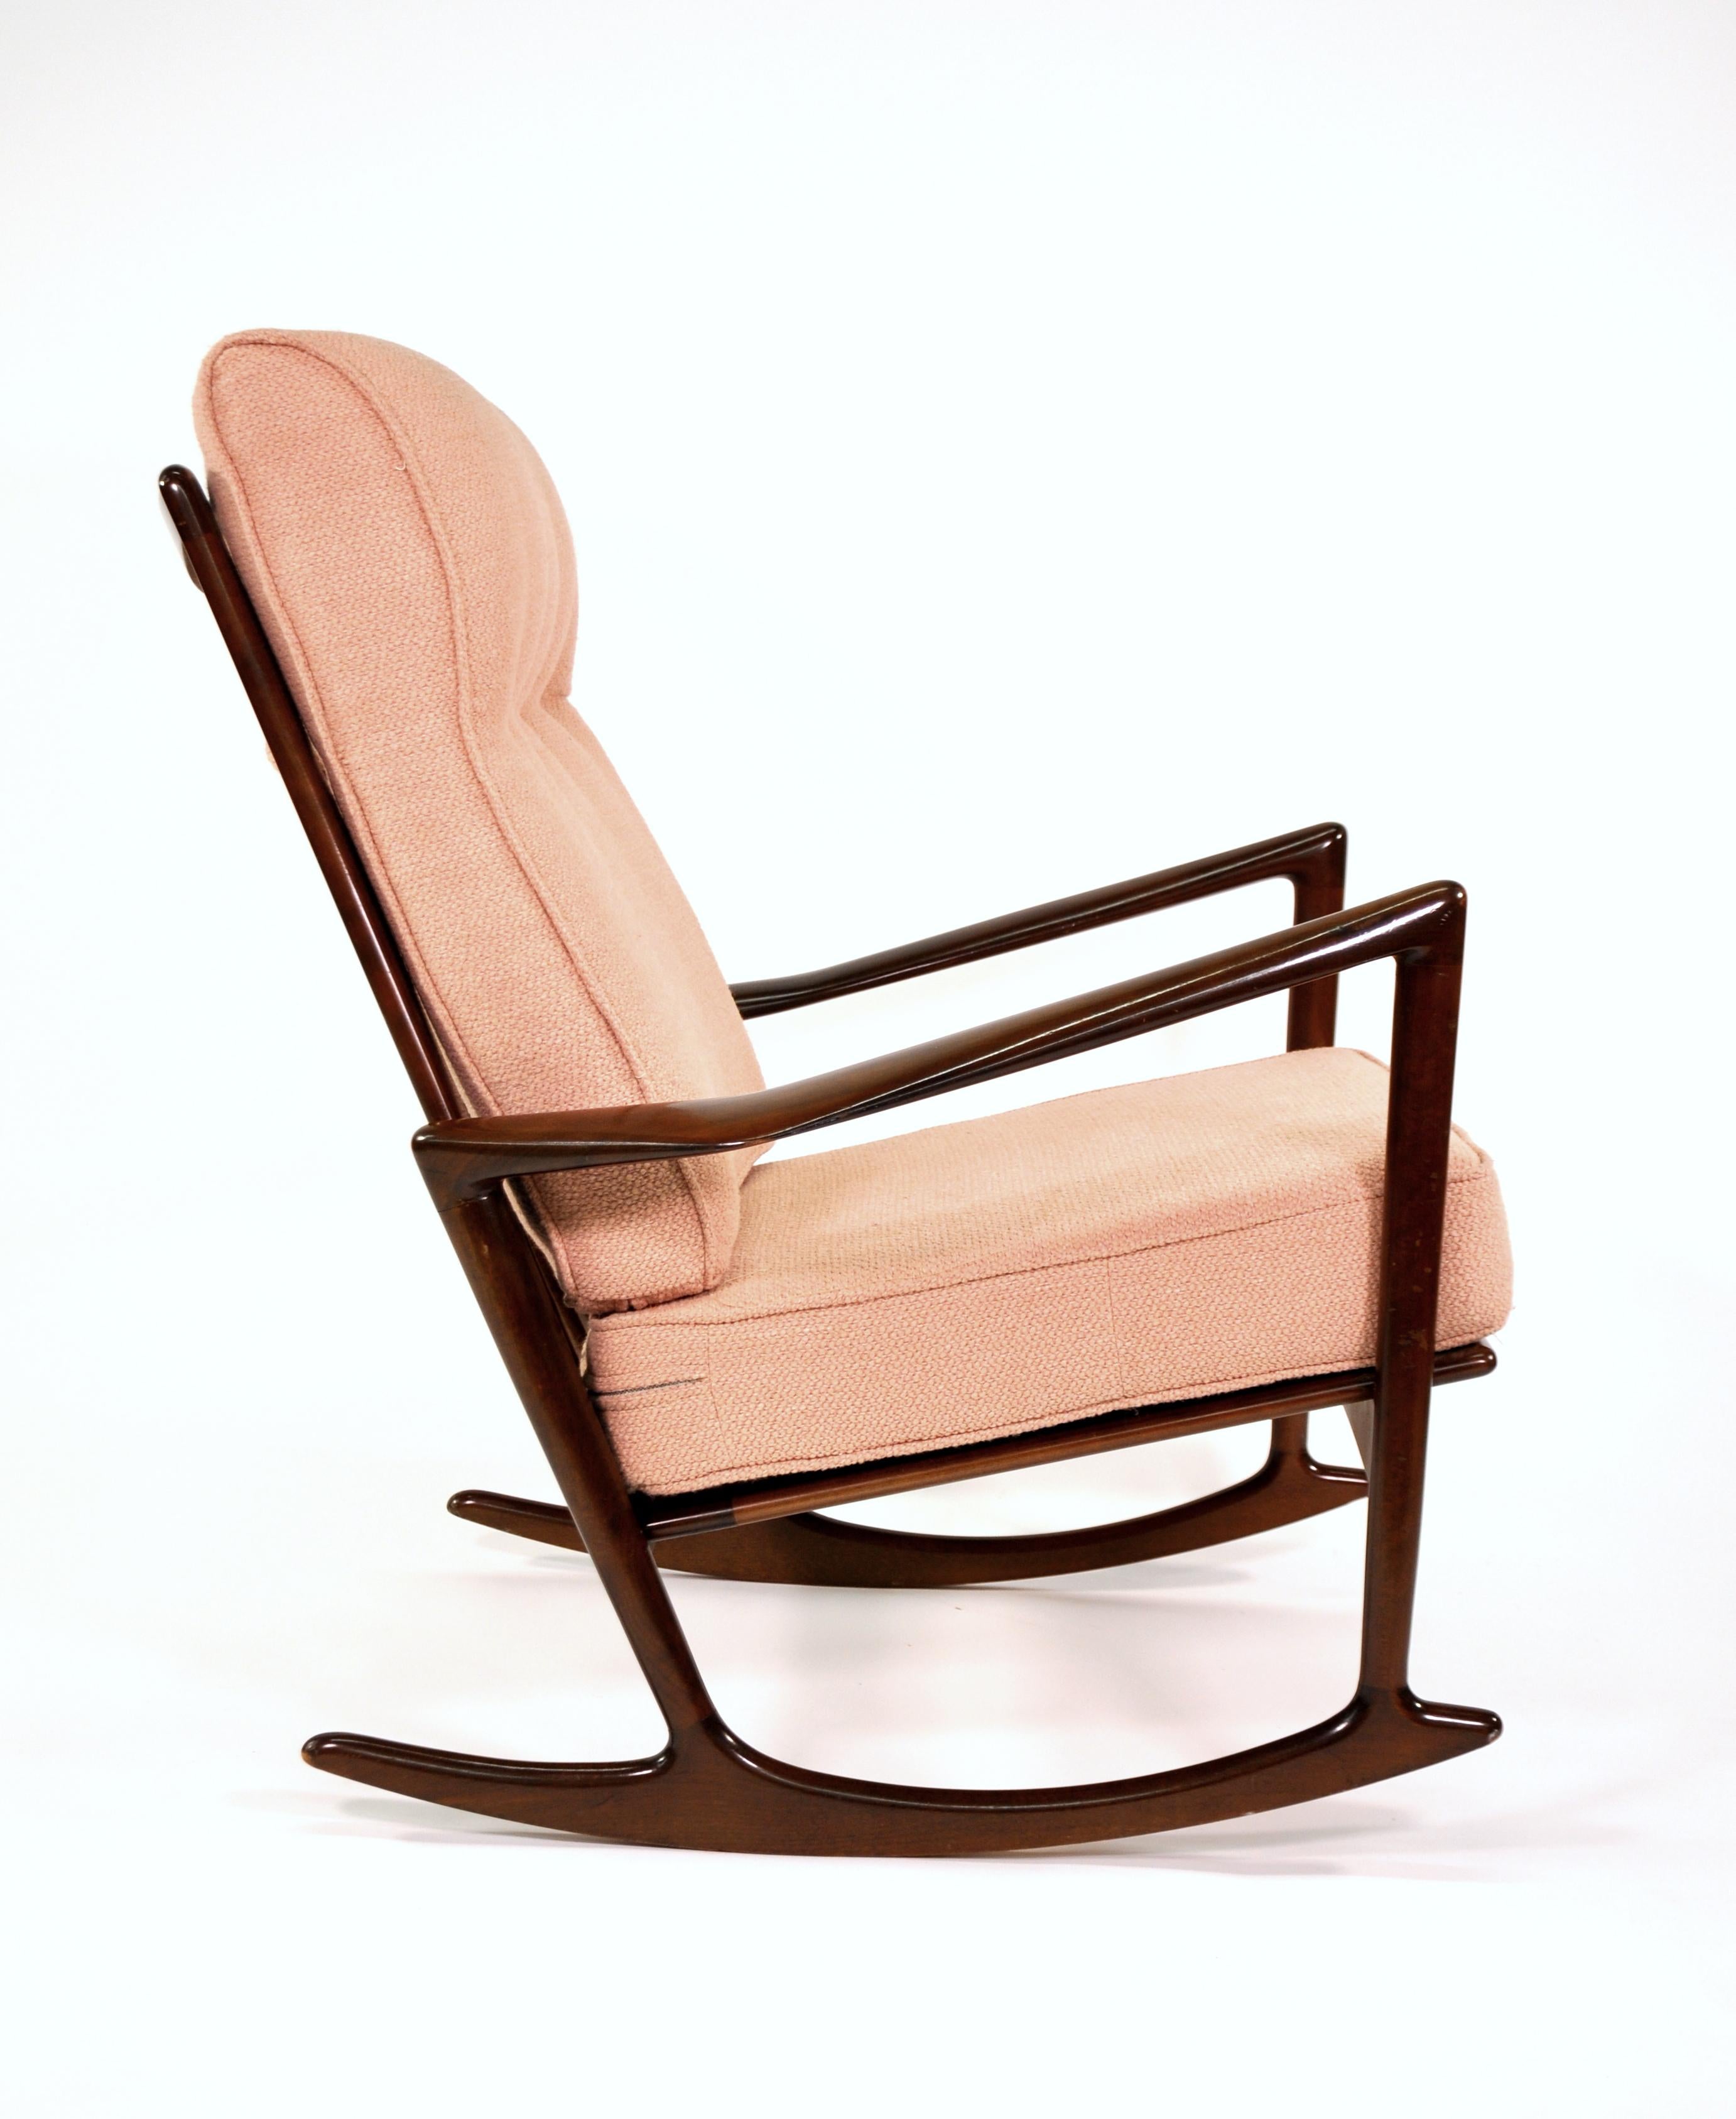 Rare Mid-Century Modern rocking chair, model 650-15, designed by Ib Kofod-Larsen for Selig in Denmark, circa 1960s. This elegant rocker has a walnut-stained beechwood frame with an open back and sculpted armrests creating a gorgeous modern profile.